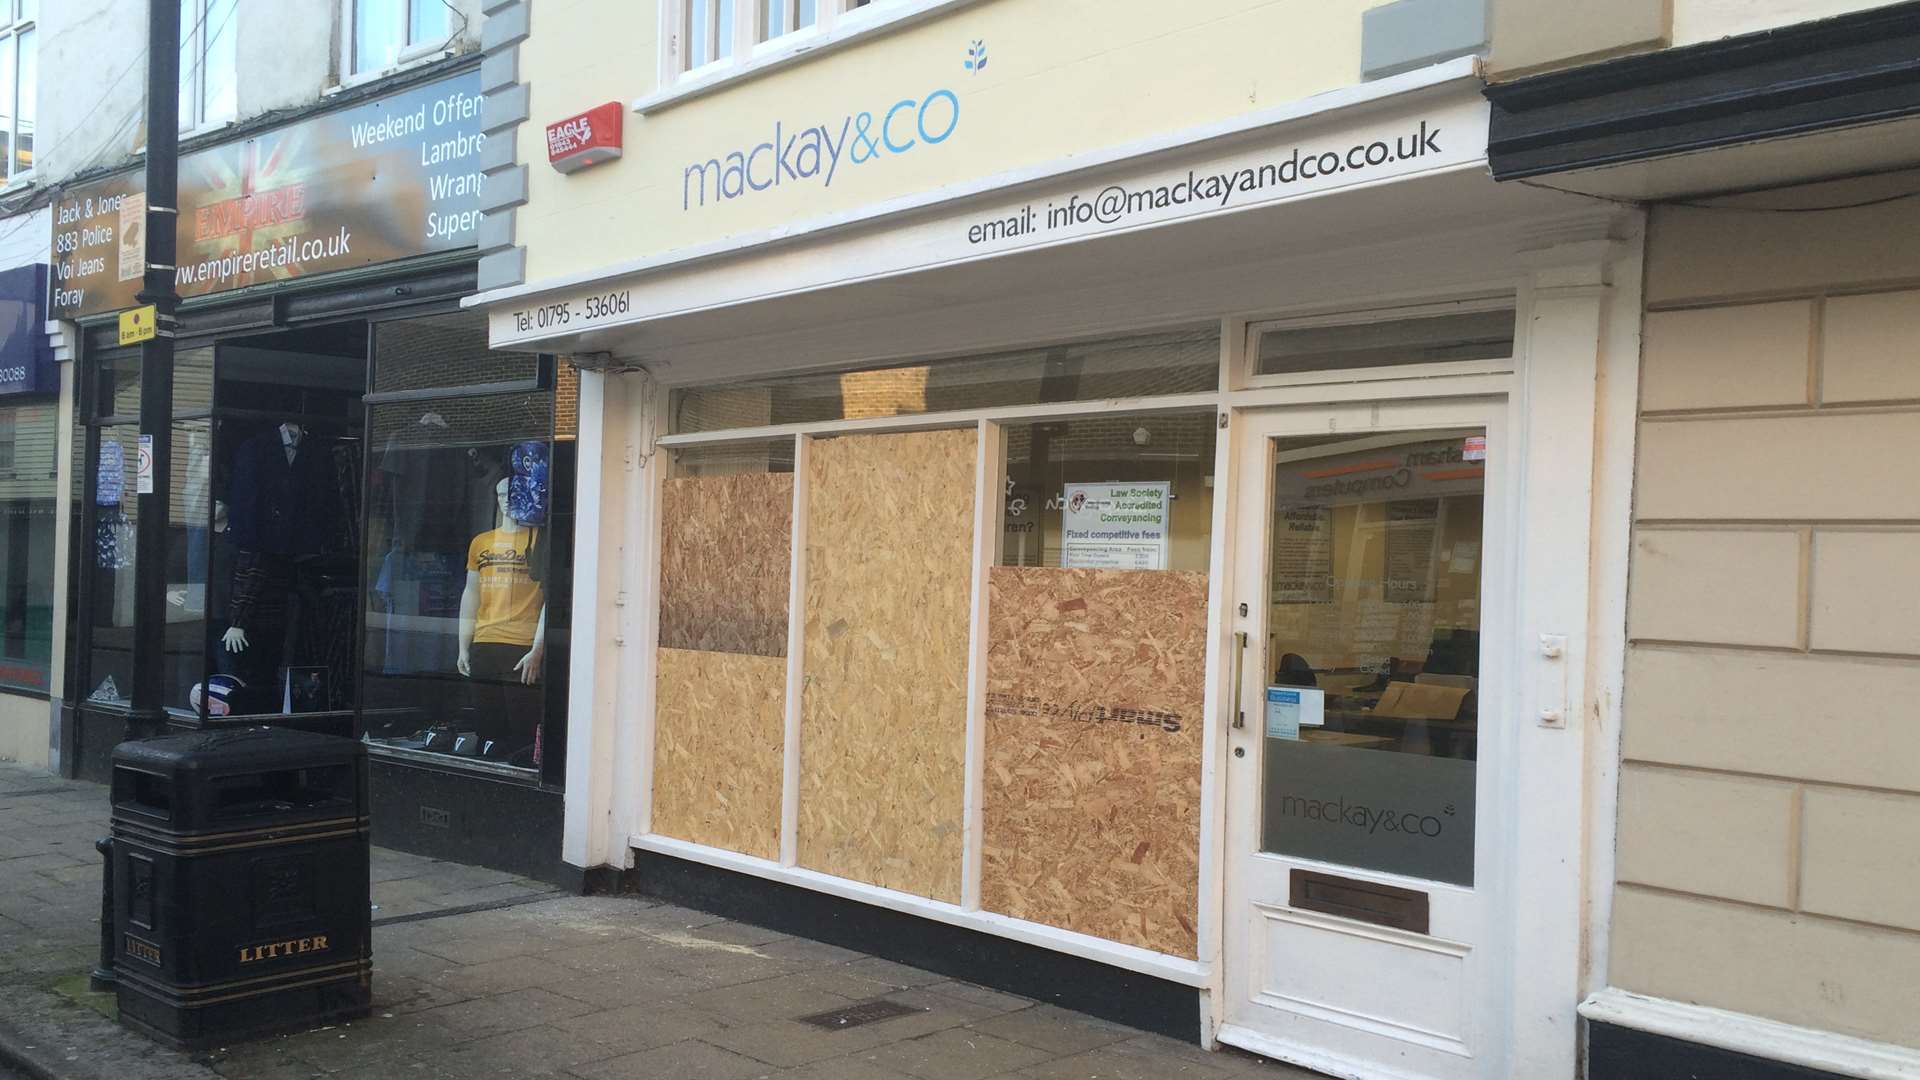 The Mackay & Co solicitors had its windows smashed.